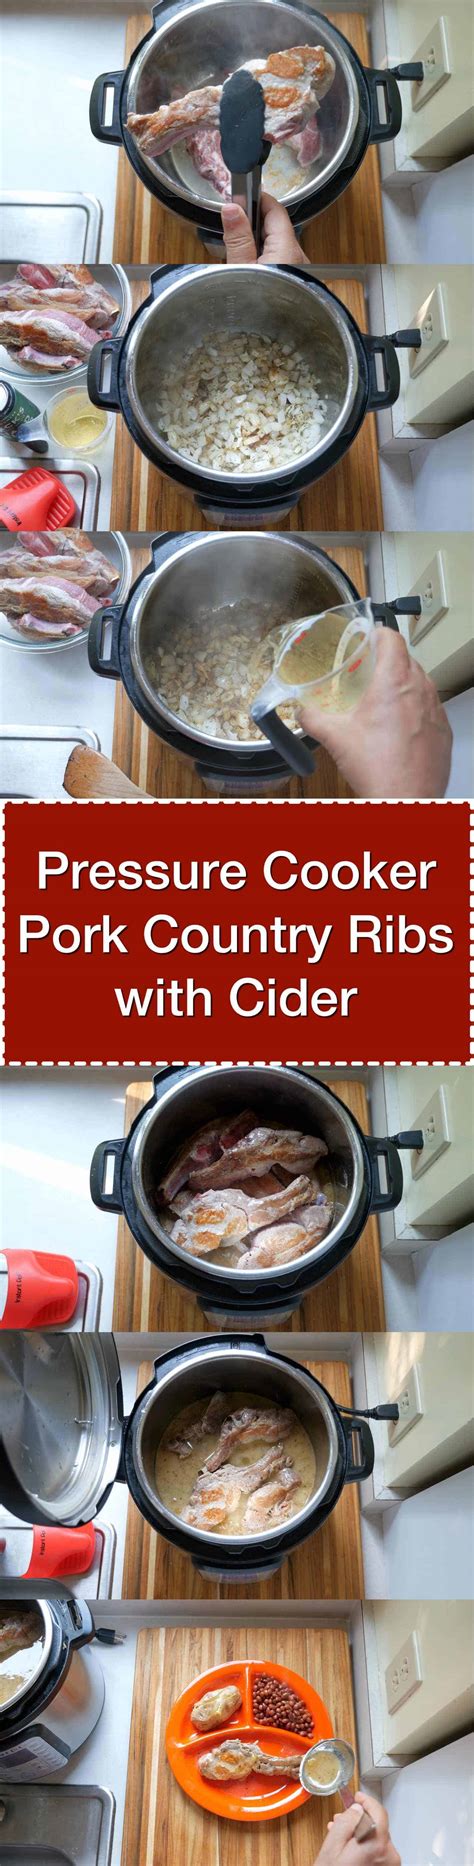 pressure-cooker-pork-country-ribs-with-cider-and image